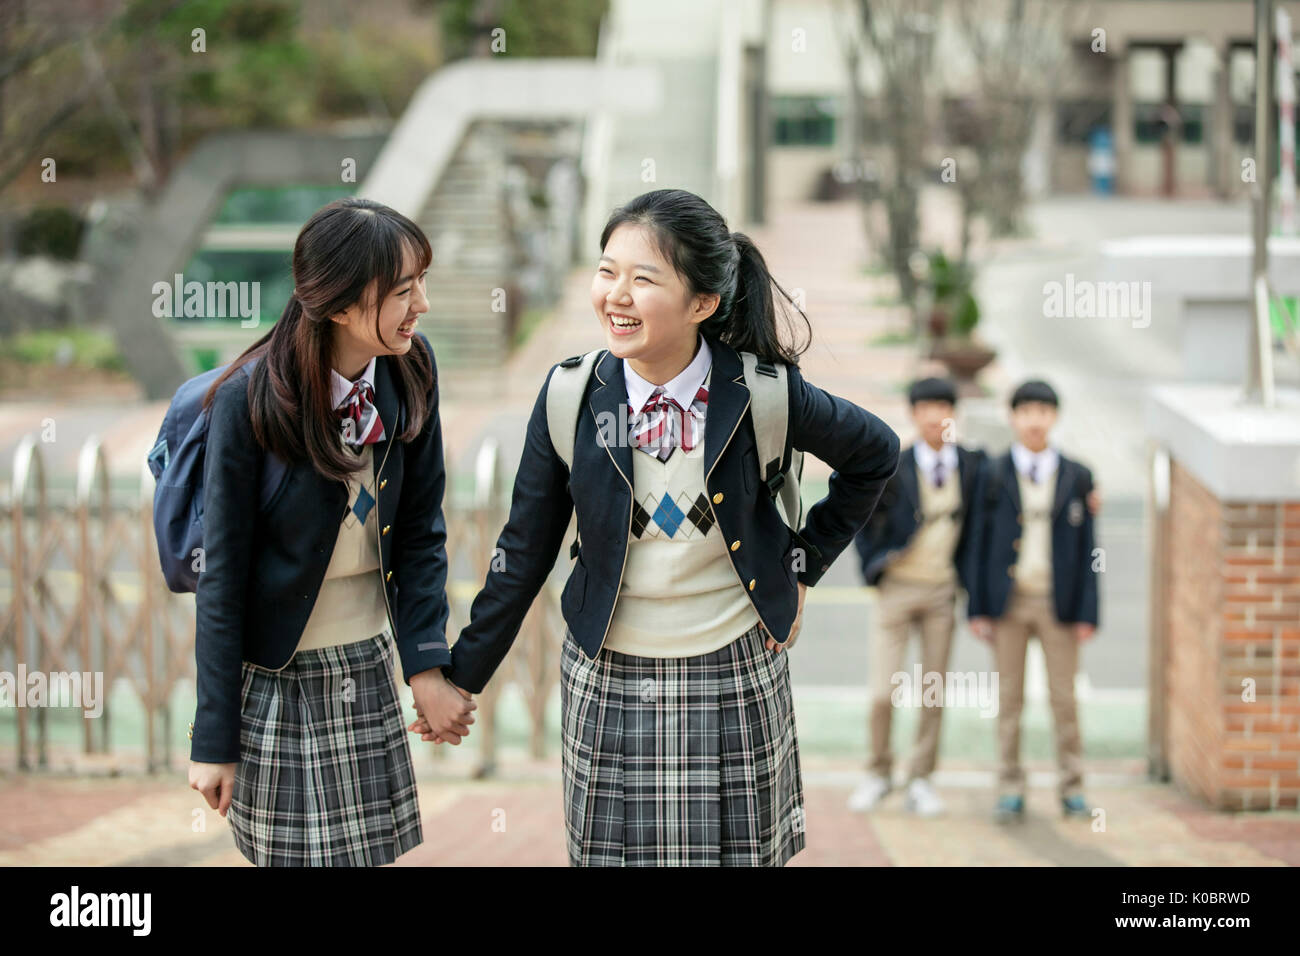 Two smiling school girls holding hands face to face Stock Photo